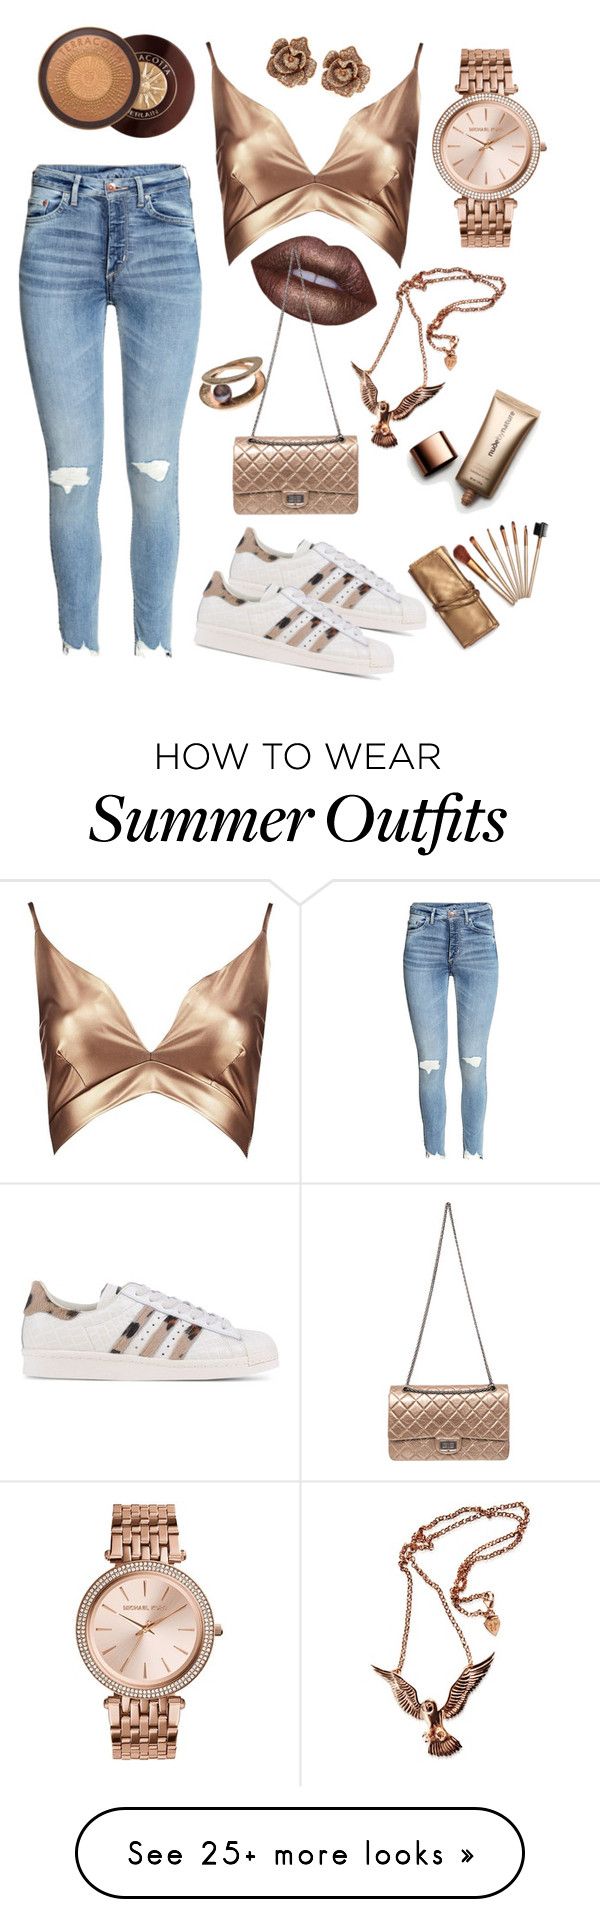 "bronze n  jeans  *•*" by chantellexxxx on Polyvore featuring adidas...